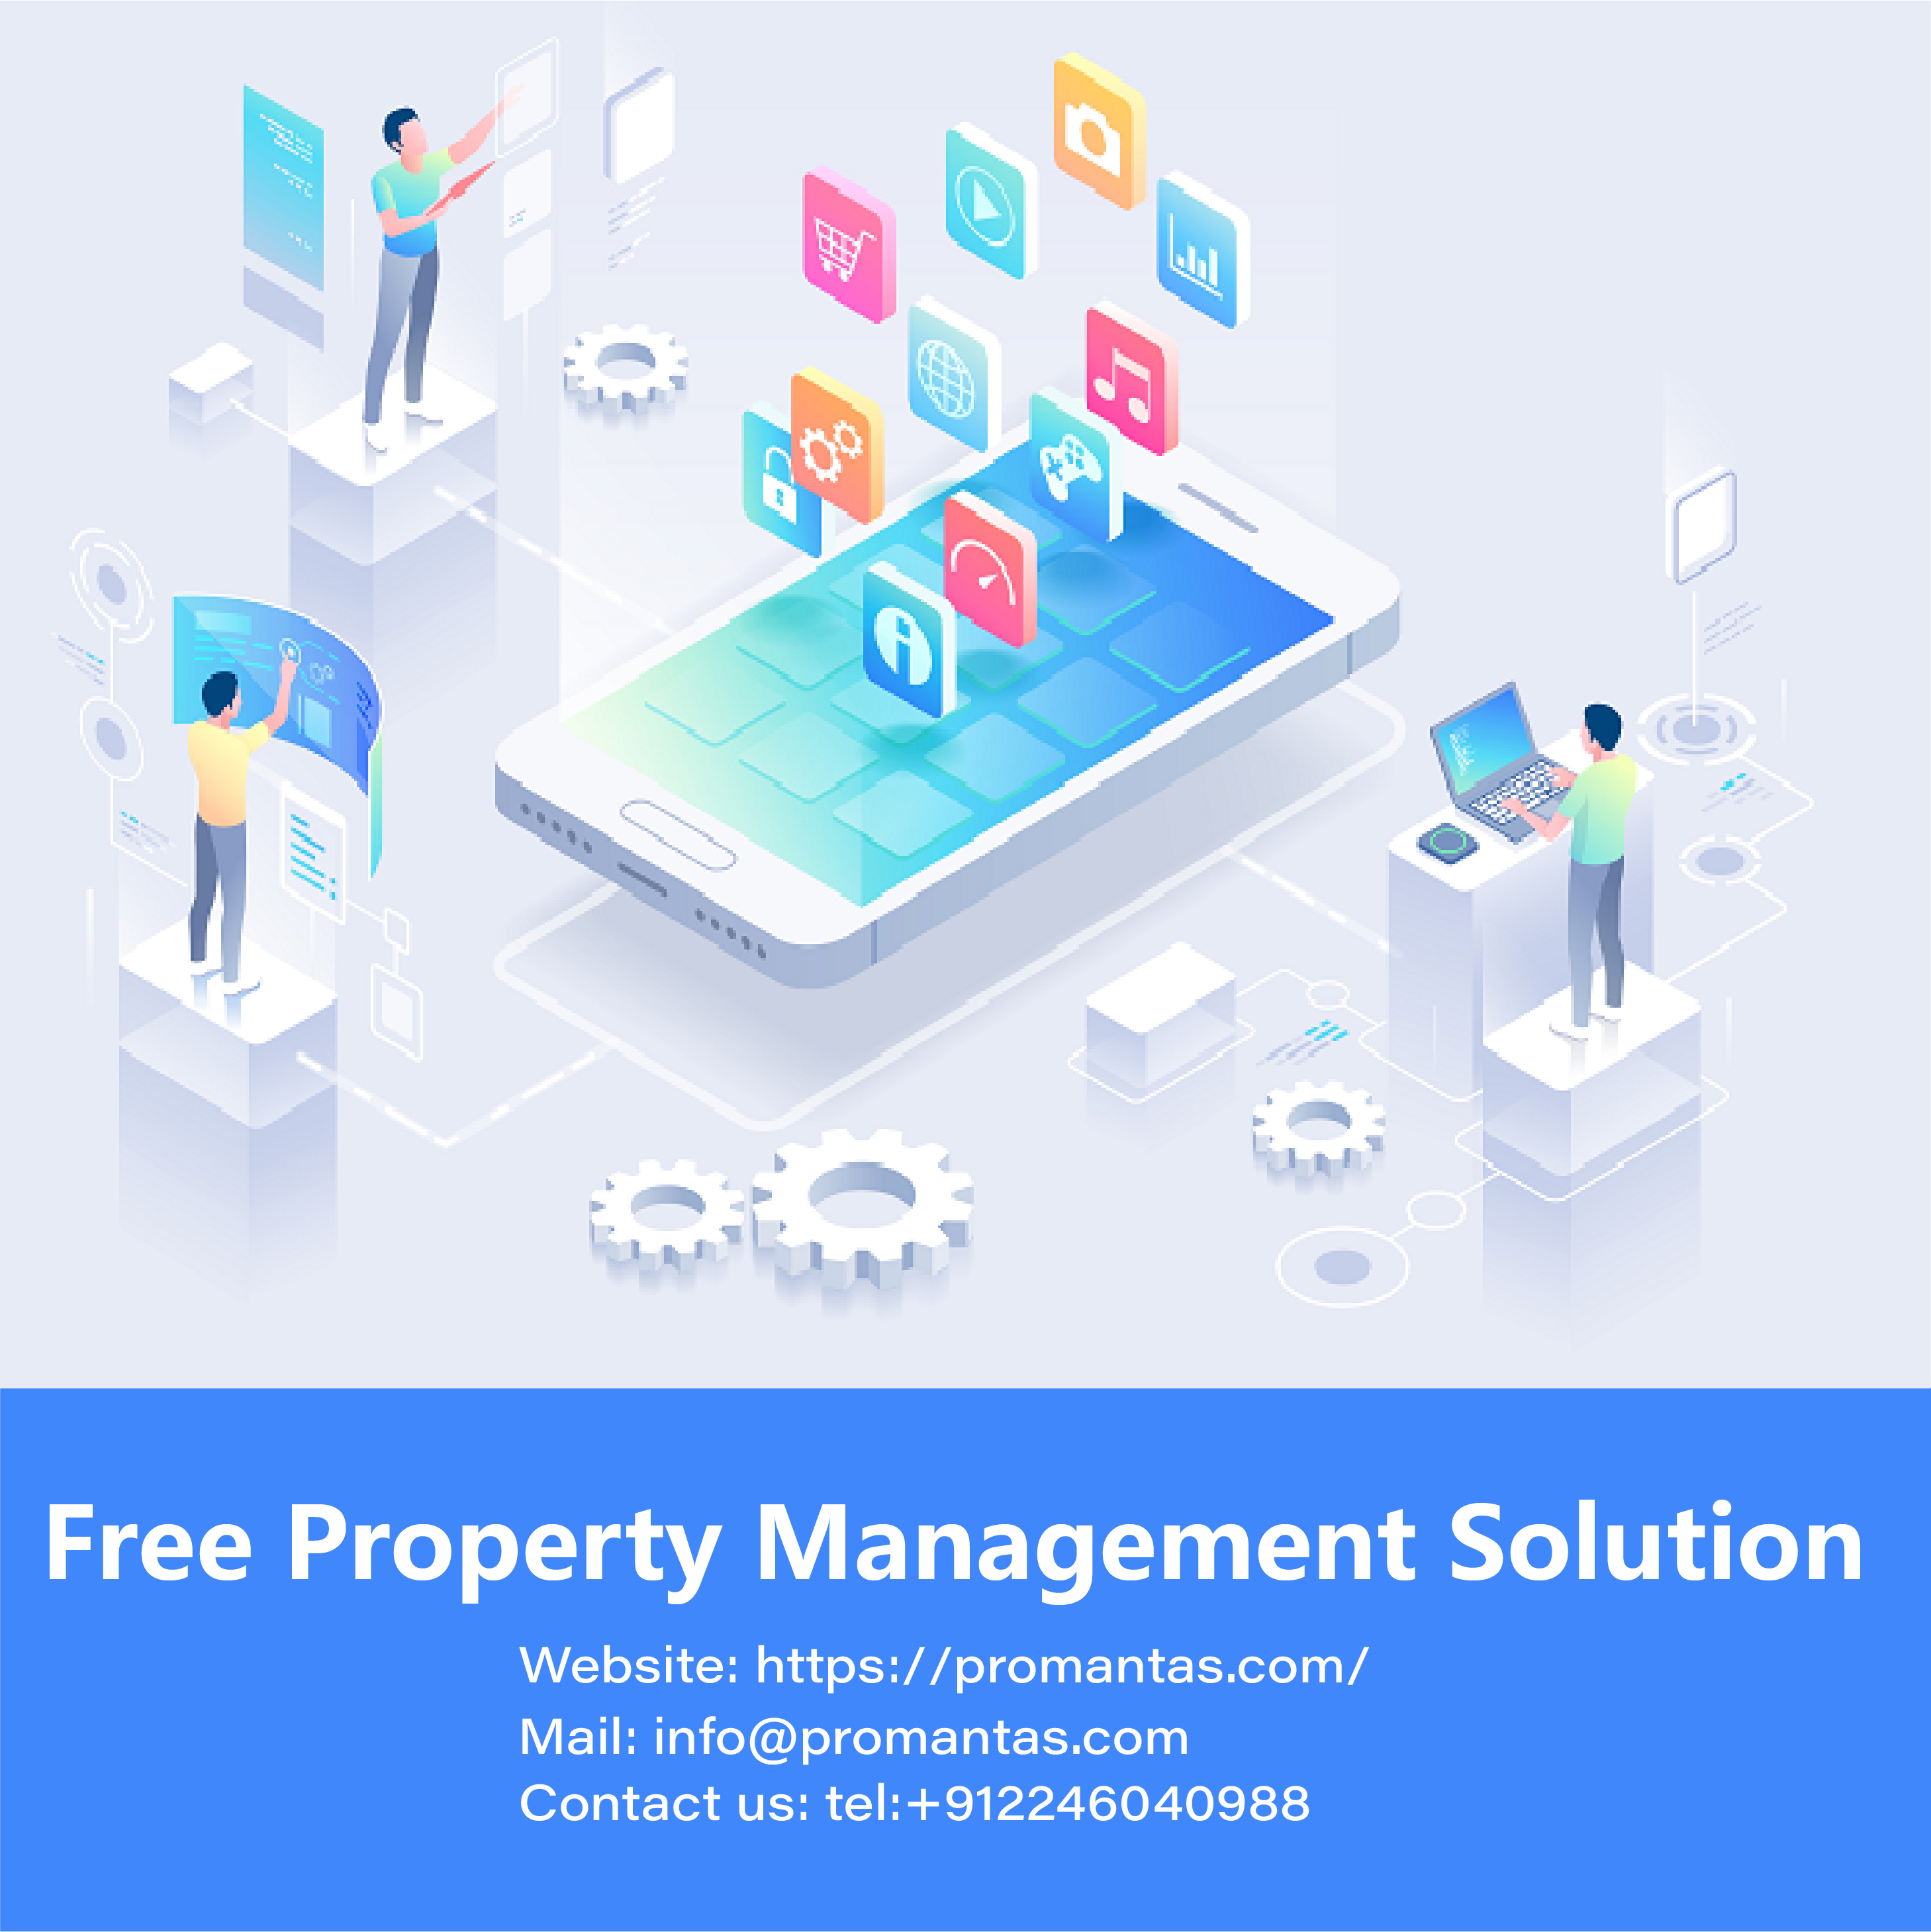  Seamless Property Management Made Easy: A Free Solution for Every Need